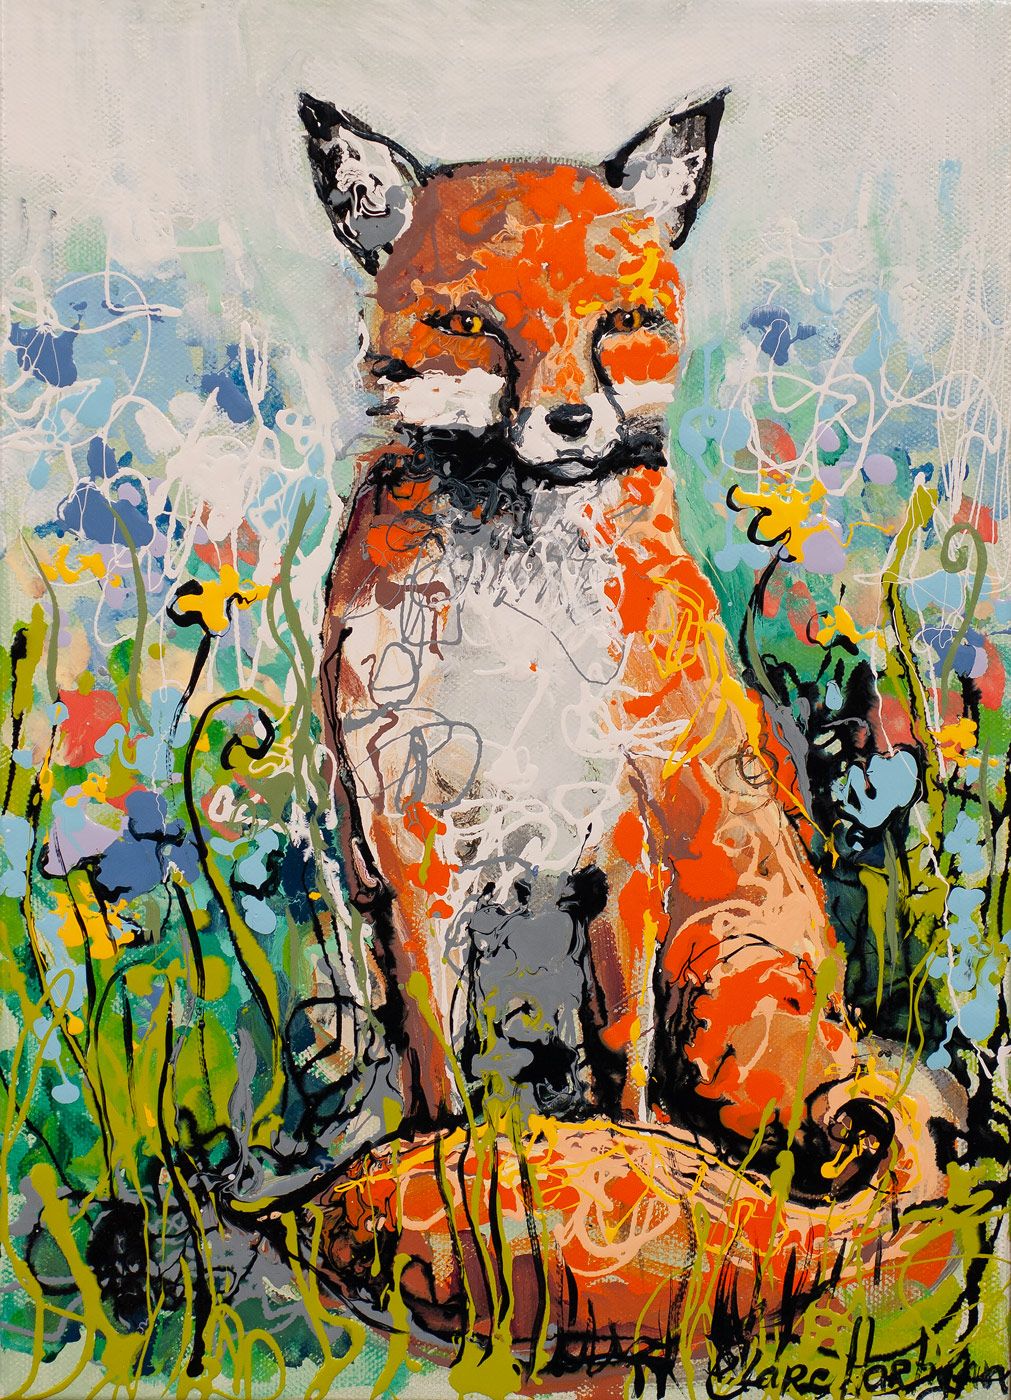 A Fox Amongst the Flowers by Clare Hartigan